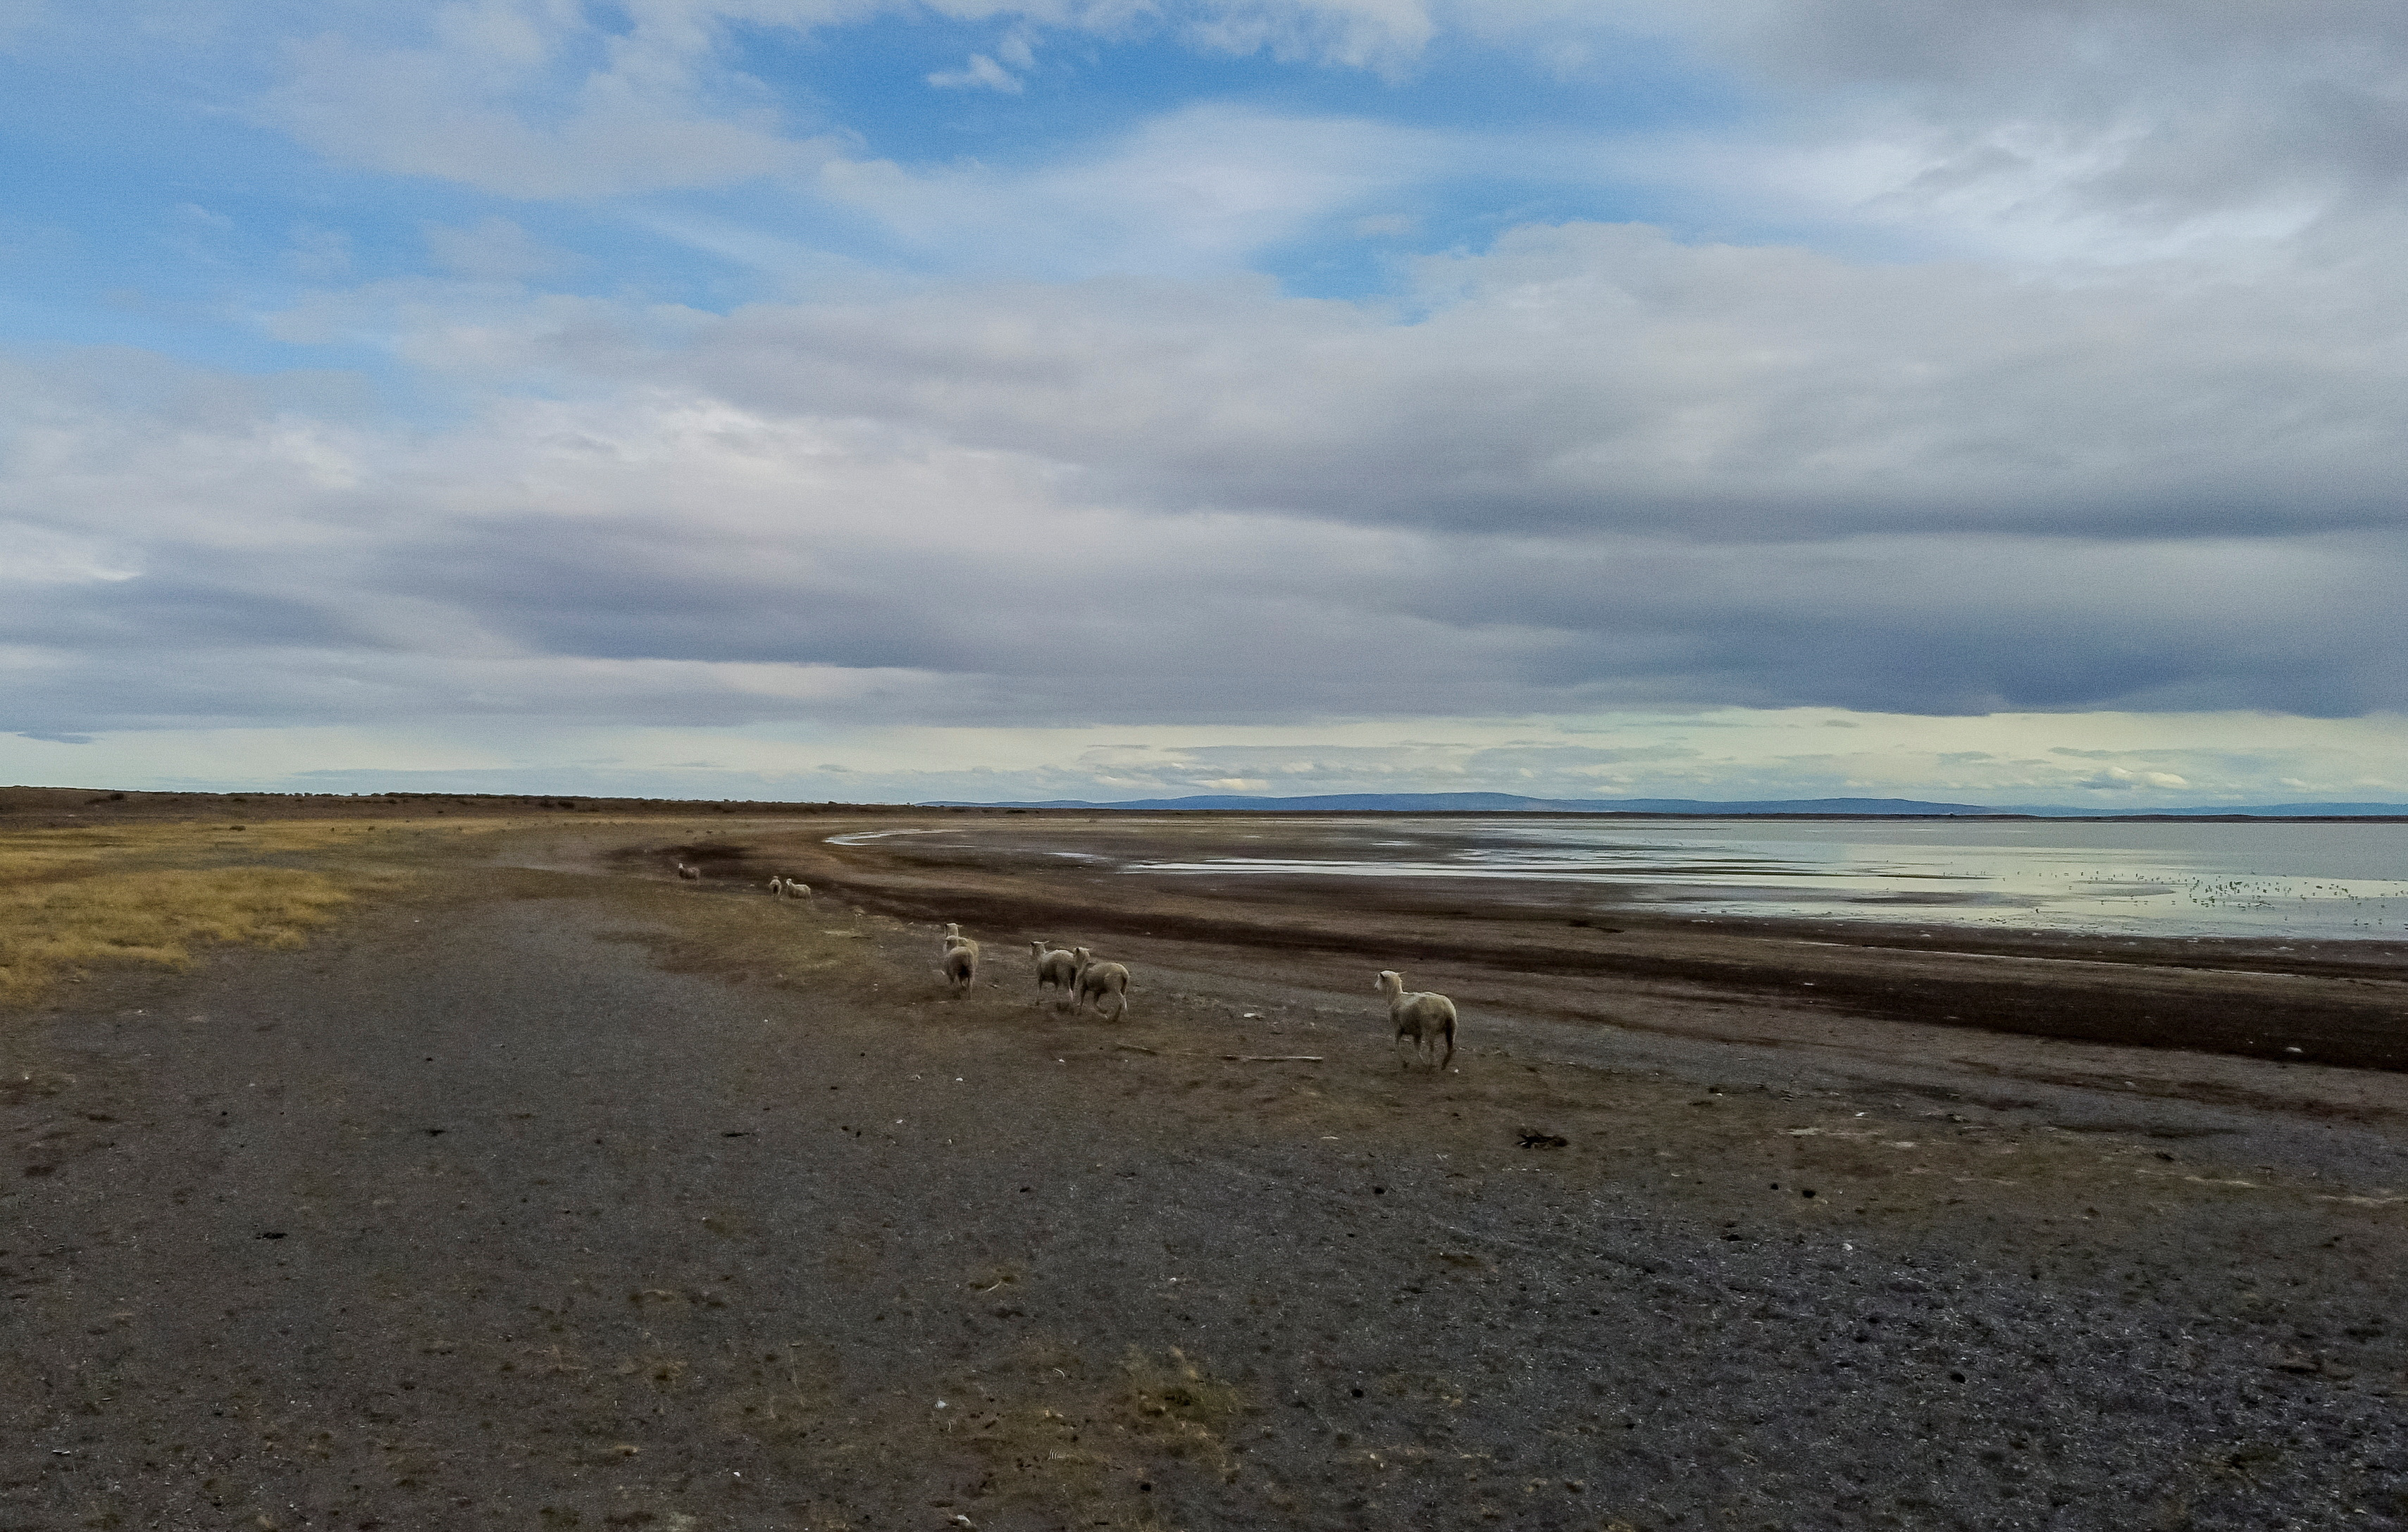 Sheep run near a wetland that is drying up, in Punta Arenas